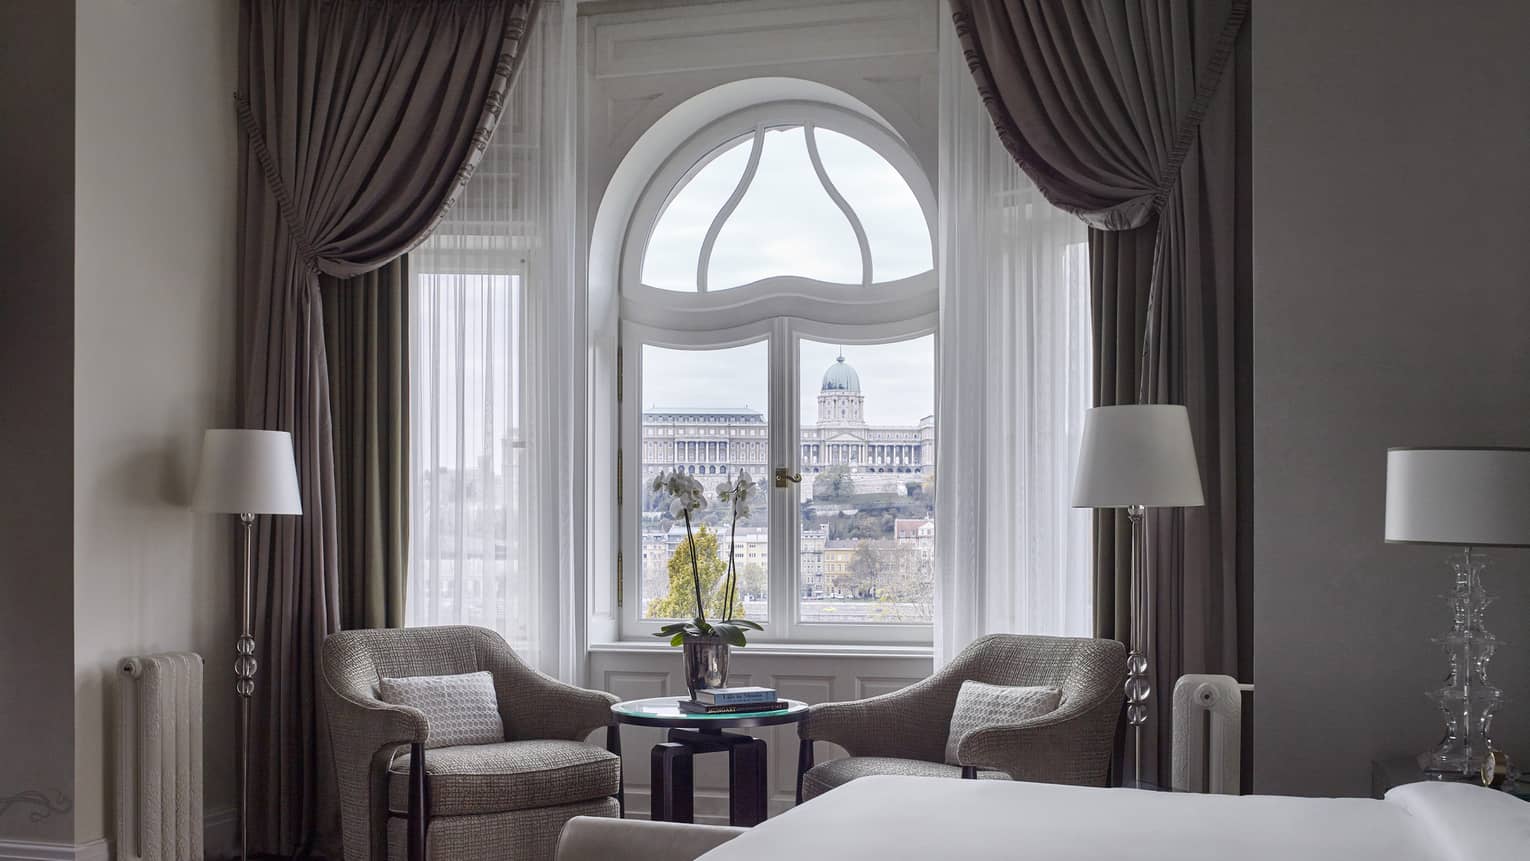 Buda Castle Presidential Suite is furnished with a two sitting chairs next to a curved window, lamps, a large bed and gray curtains. 